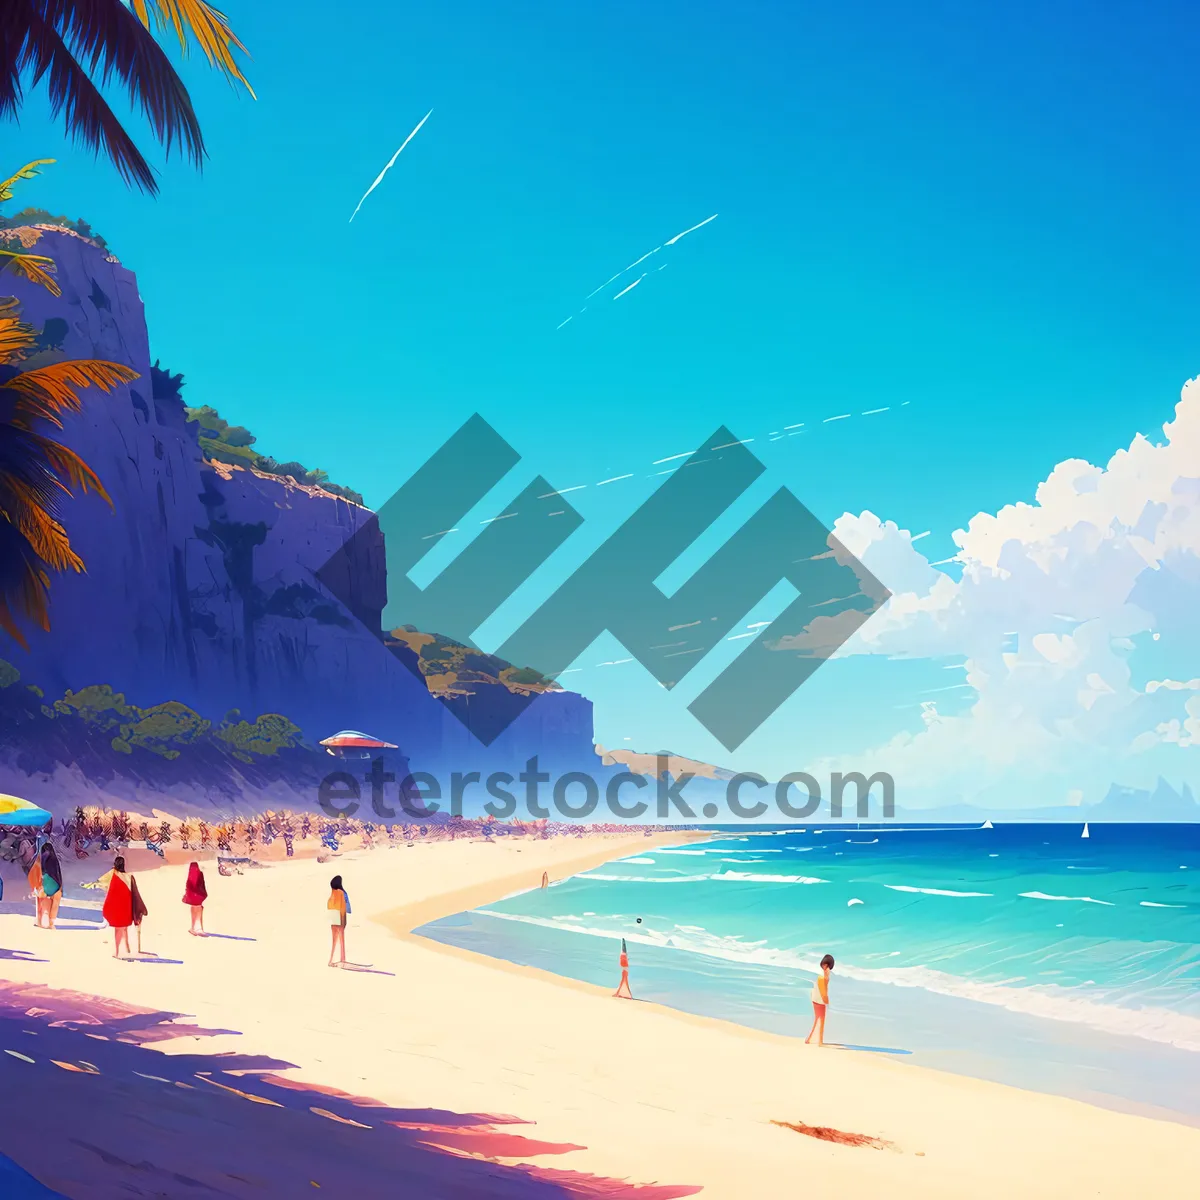 Picture of Turquoise Paradise: Serene Coastline with Palm Trees